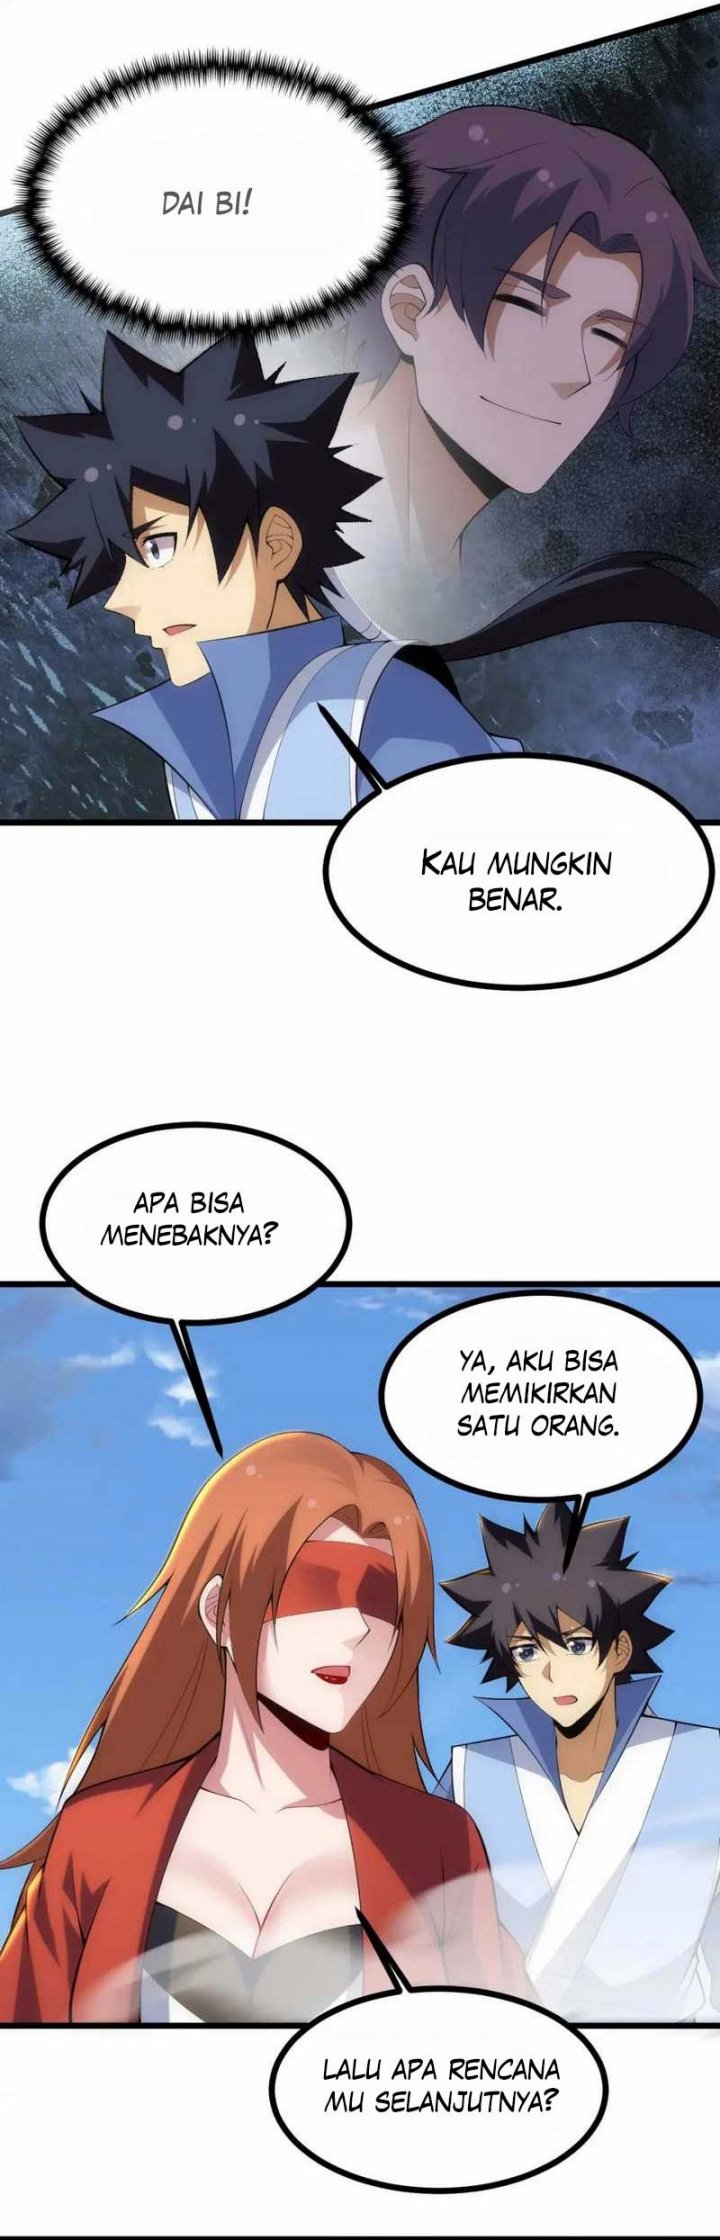 Dilarang COPAS - situs resmi www.mangacanblog.com - Komik i just want to be beaten to death by everyone 179 - chapter 179 180 Indonesia i just want to be beaten to death by everyone 179 - chapter 179 Terbaru 14|Baca Manga Komik Indonesia|Mangacan